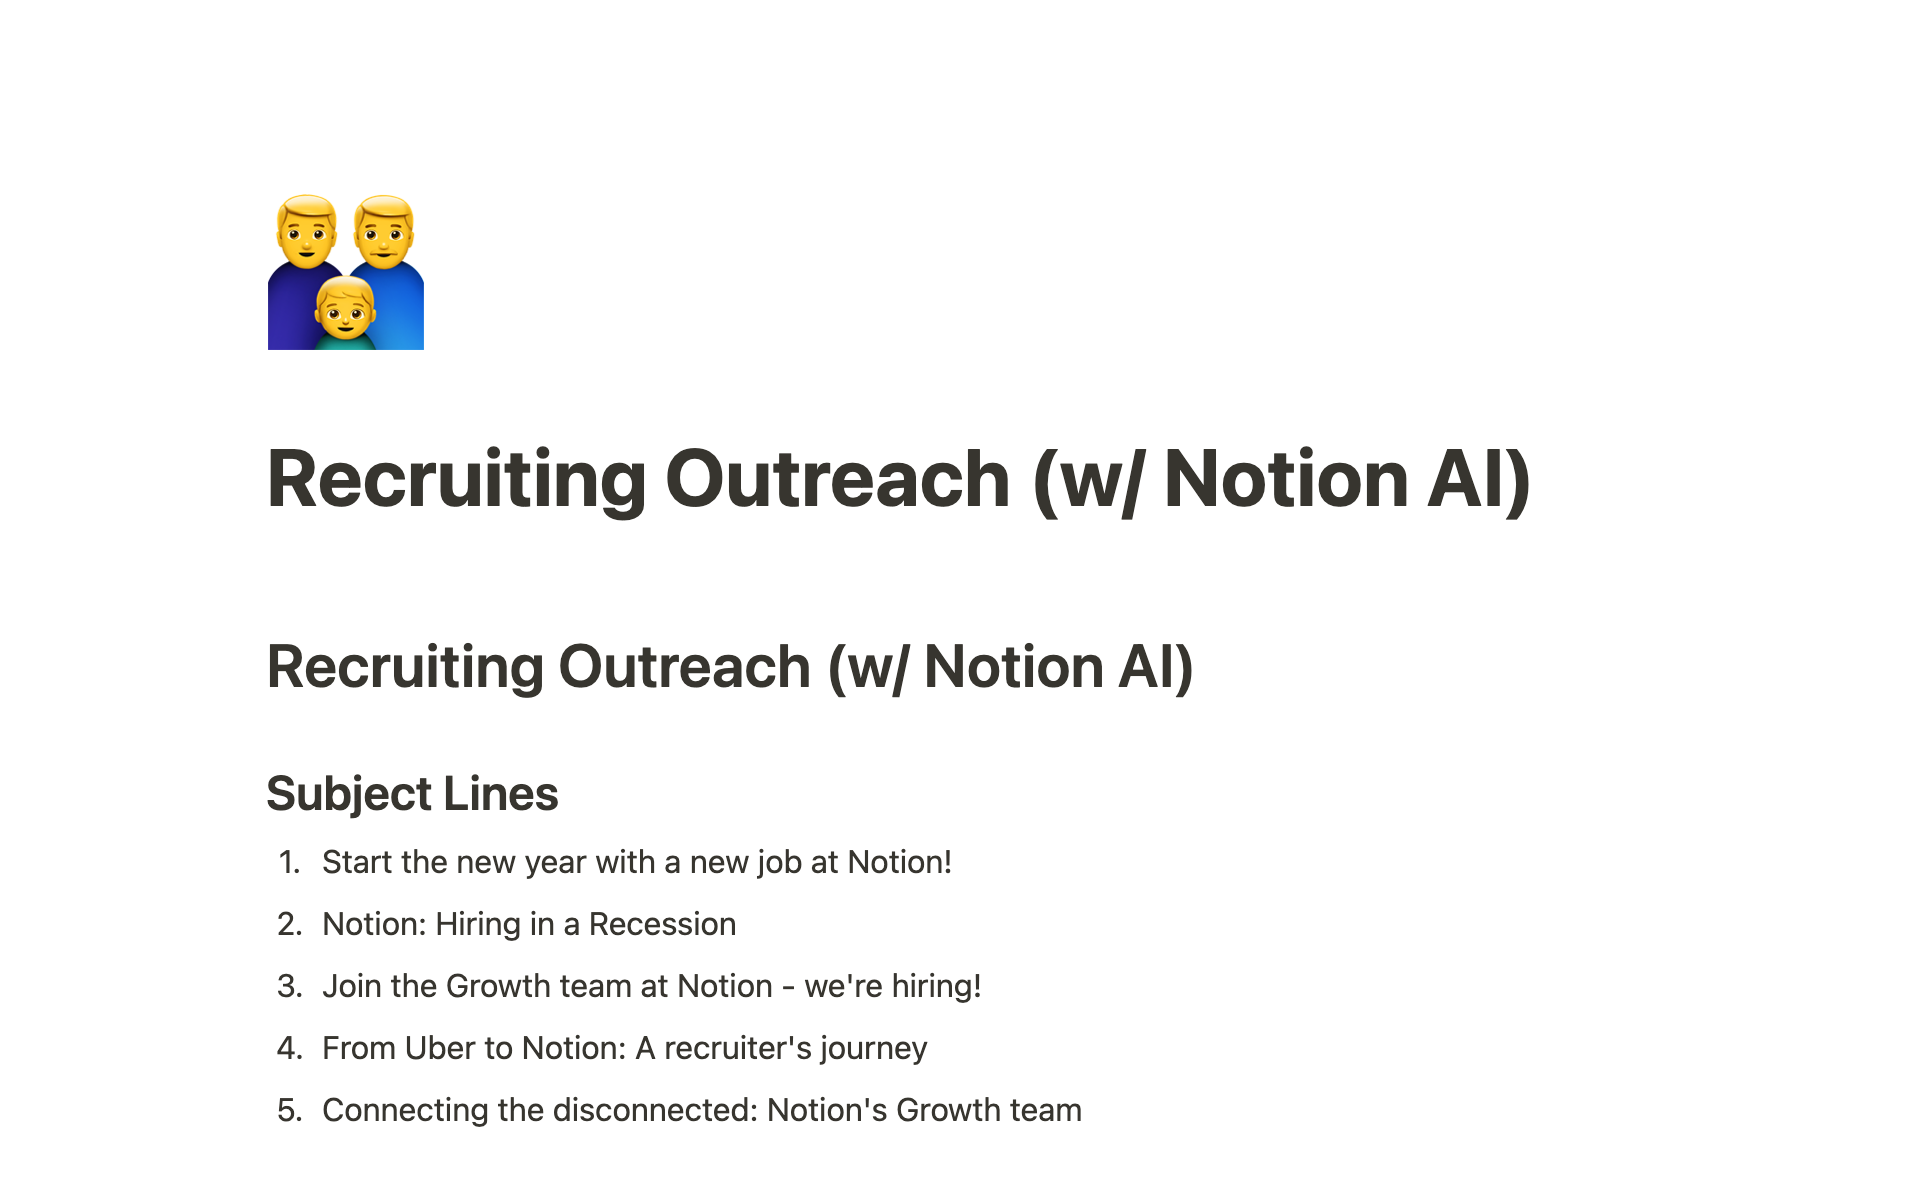 An image of recruiting outreach email subject lines generated with Notion AI.